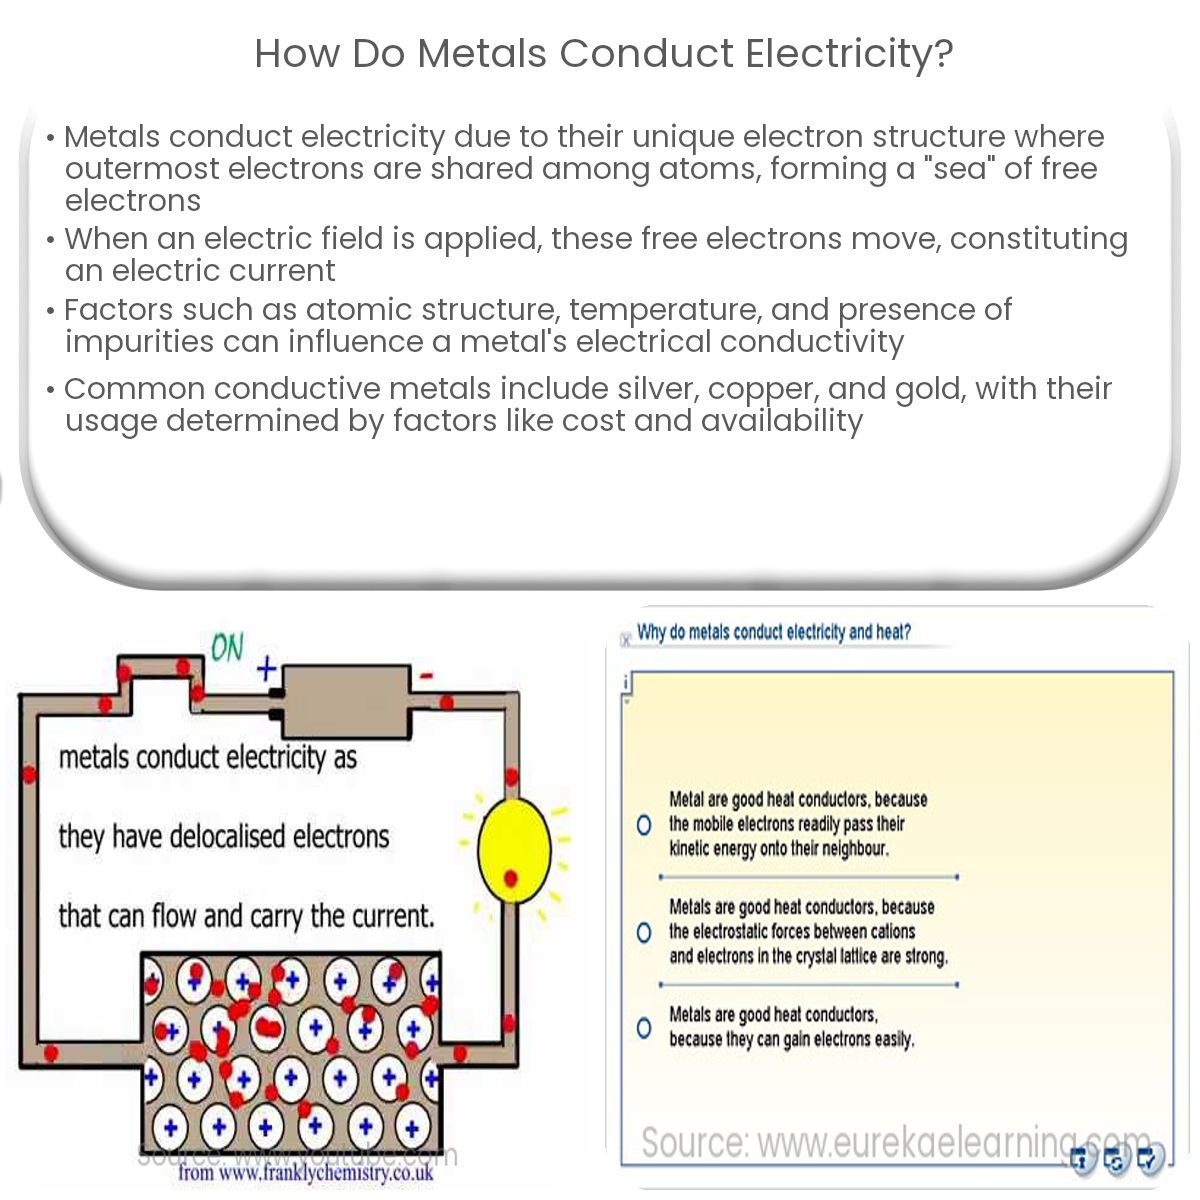 How do metals conduct electricity?